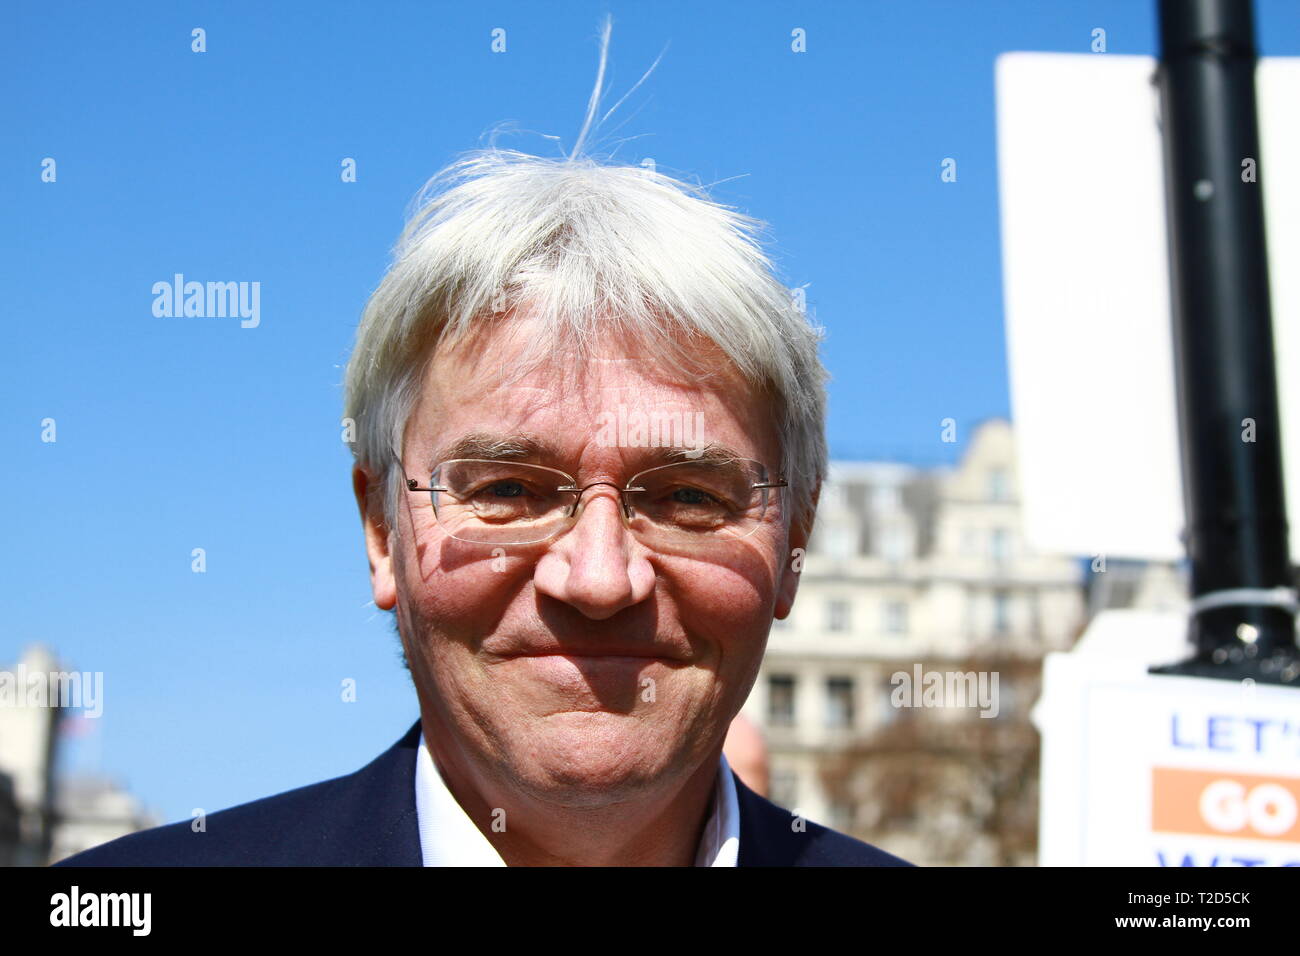 ANDREW MITCHELL MP IN PARLIAMENT SQUARE, WESTMINSTER, UK ON 1ST ...